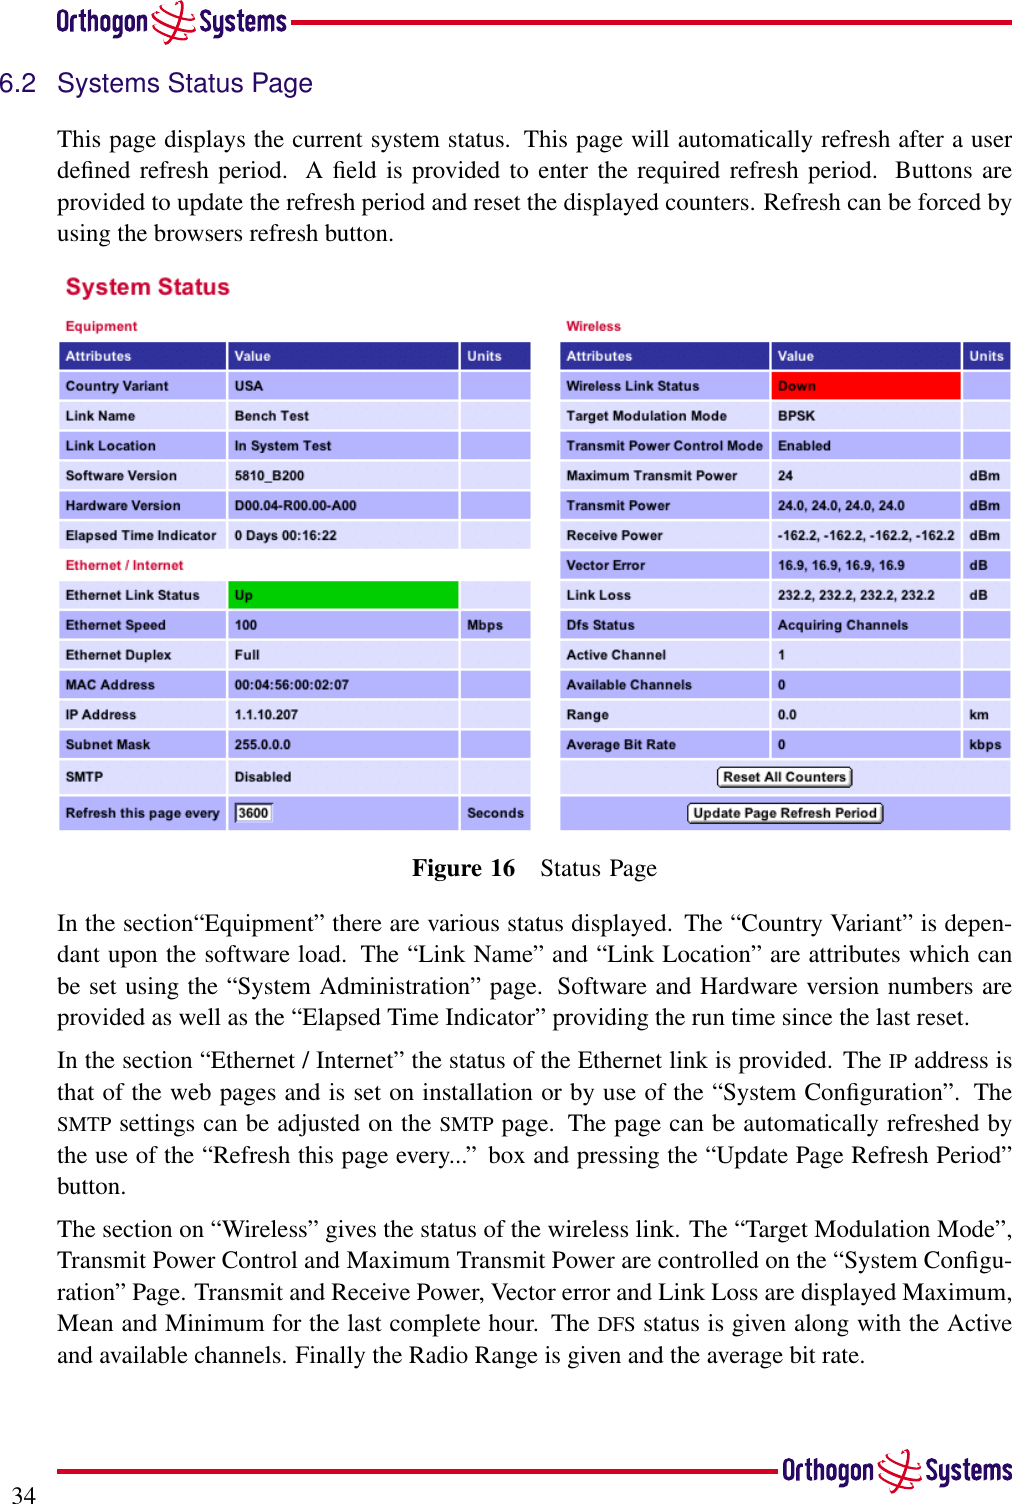 346.2 Systems Status PageThis page displays the current system status. This page will automatically refresh after a userdeﬁned refresh period. A ﬁeld is provided to enter the required refresh period. Buttons areprovided to update the refresh period and reset the displayed counters. Refresh can be forced byusing the browsers refresh button.Figure 16 Status PageIn the section“Equipment” there are various status displayed. The “Country Variant” is depen-dant upon the software load. The “Link Name” and “Link Location” are attributes which canbe set using the “System Administration” page. Software and Hardware version numbers areprovided as well as the “Elapsed Time Indicator” providing the run time since the last reset.In the section “Ethernet / Internet” the status of the Ethernet link is provided. The IP address isthat of the web pages and is set on installation or by use of the “System Conﬁguration”. TheSMTP settings can be adjusted on the SMTP page. The page can be automatically refreshed bythe use of the “Refresh this page every...” box and pressing the “Update Page Refresh Period”button.The section on “Wireless” gives the status of the wireless link. The “Target Modulation Mode”,Transmit Power Control and Maximum Transmit Power are controlled on the “System Conﬁgu-ration” Page. Transmit and Receive Power, Vector error and Link Loss are displayed Maximum,Mean and Minimum for the last complete hour. The DFS status is given along with the Activeand available channels. Finally the Radio Range is given and the average bit rate.